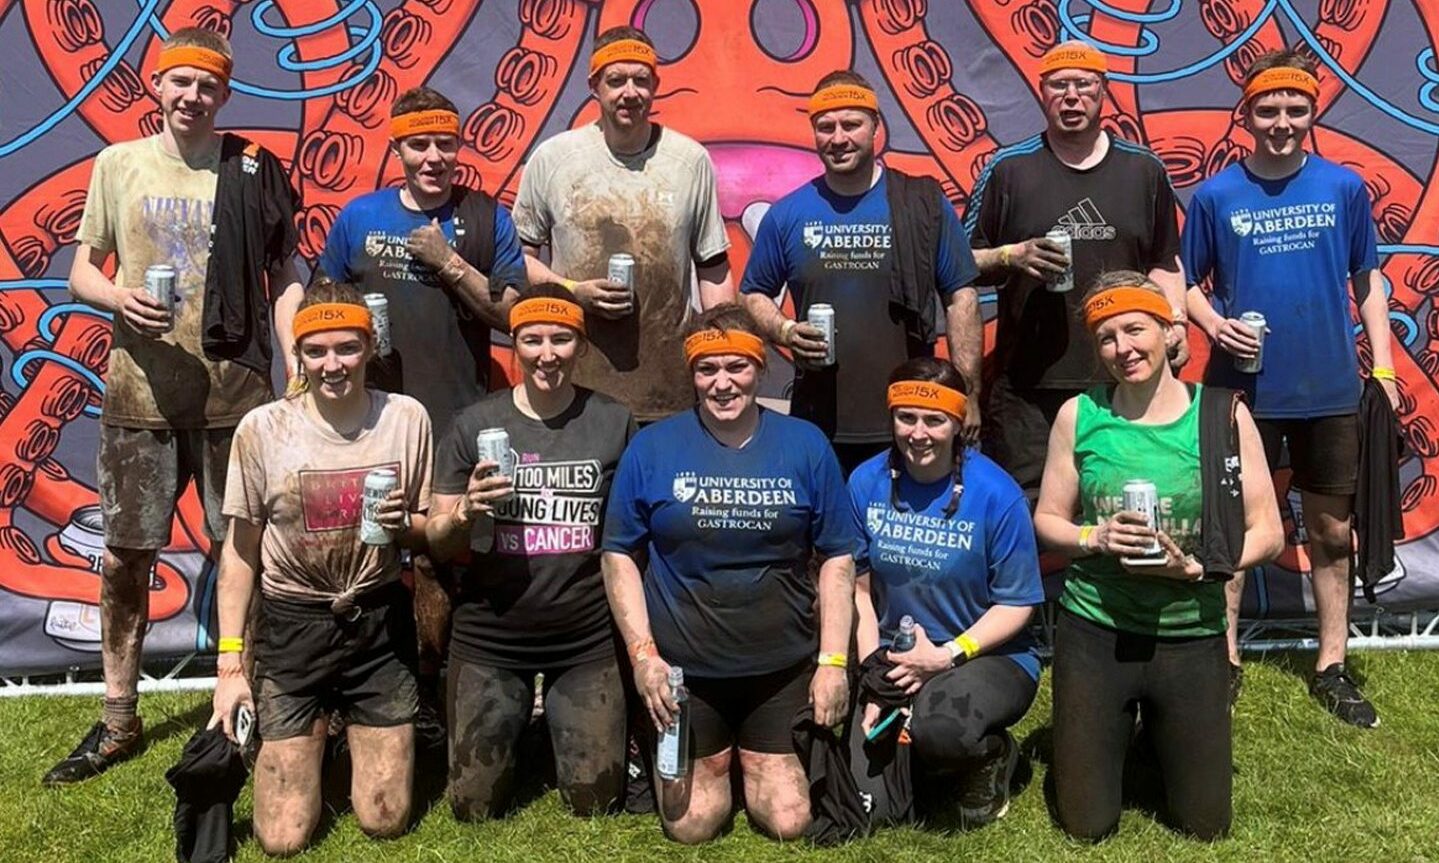 Group photo of muddy competitors after competing Tough Mudder. 